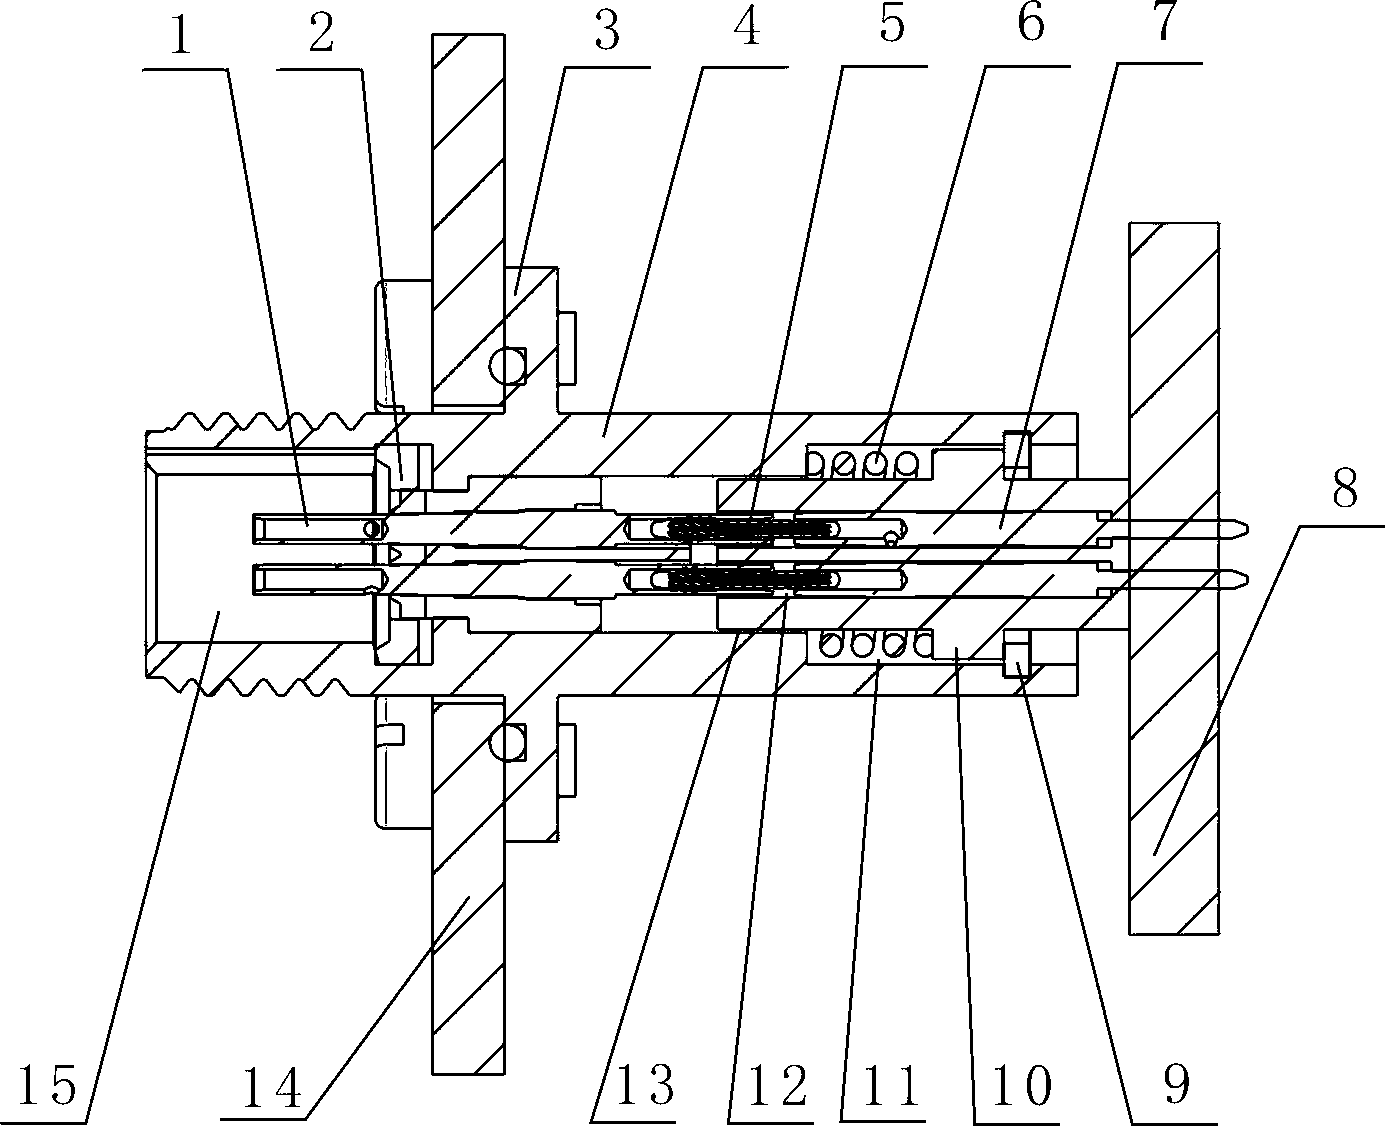 Floating connection mechanism used between hard face plate and printed board